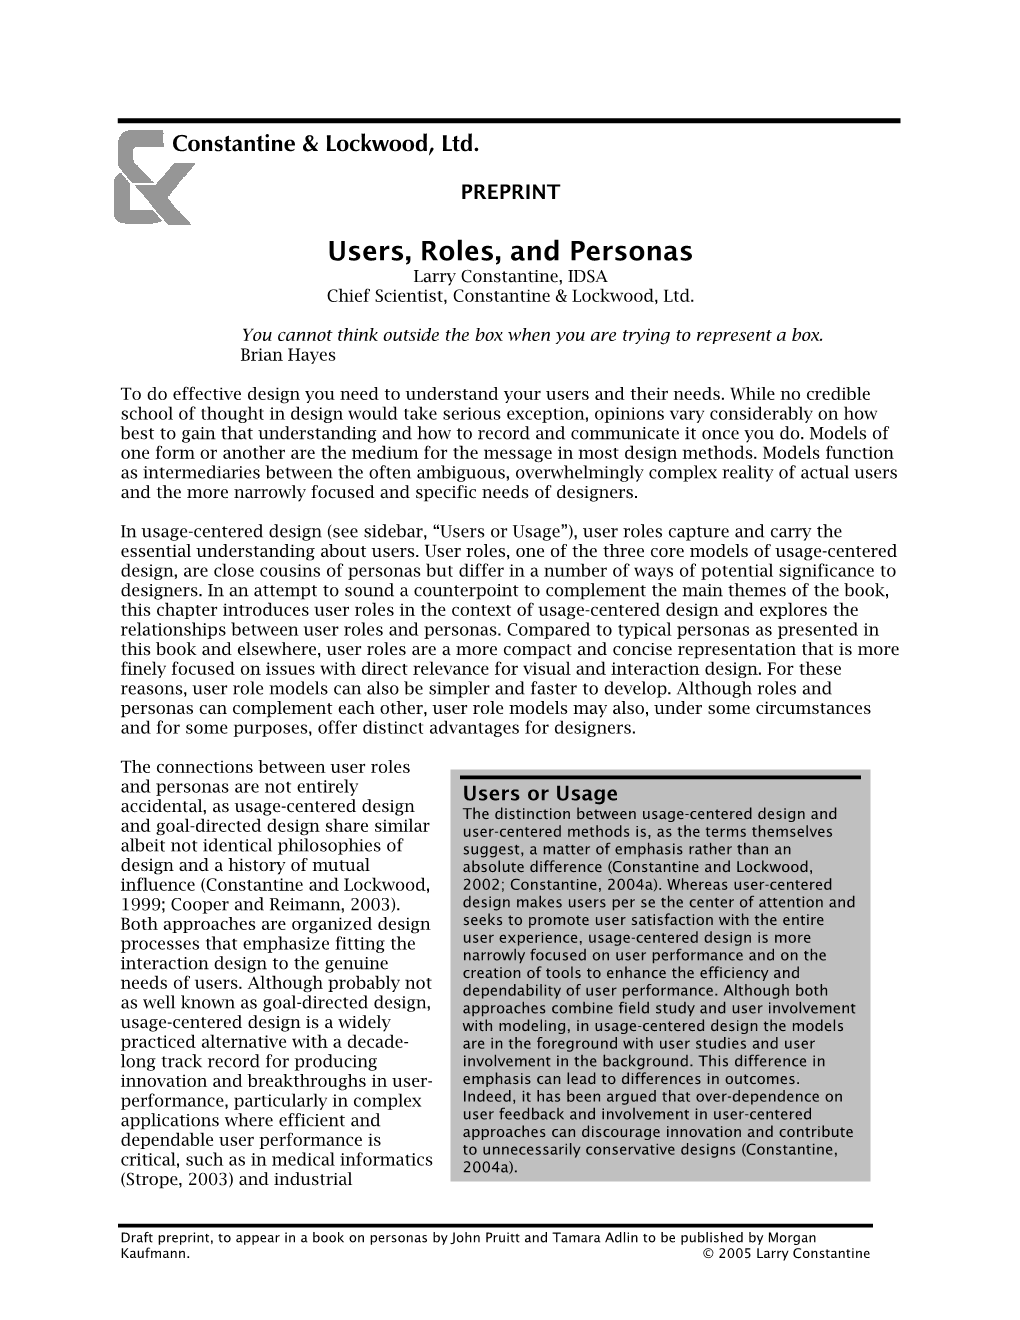 Users, Roles, and Personas (PDF)